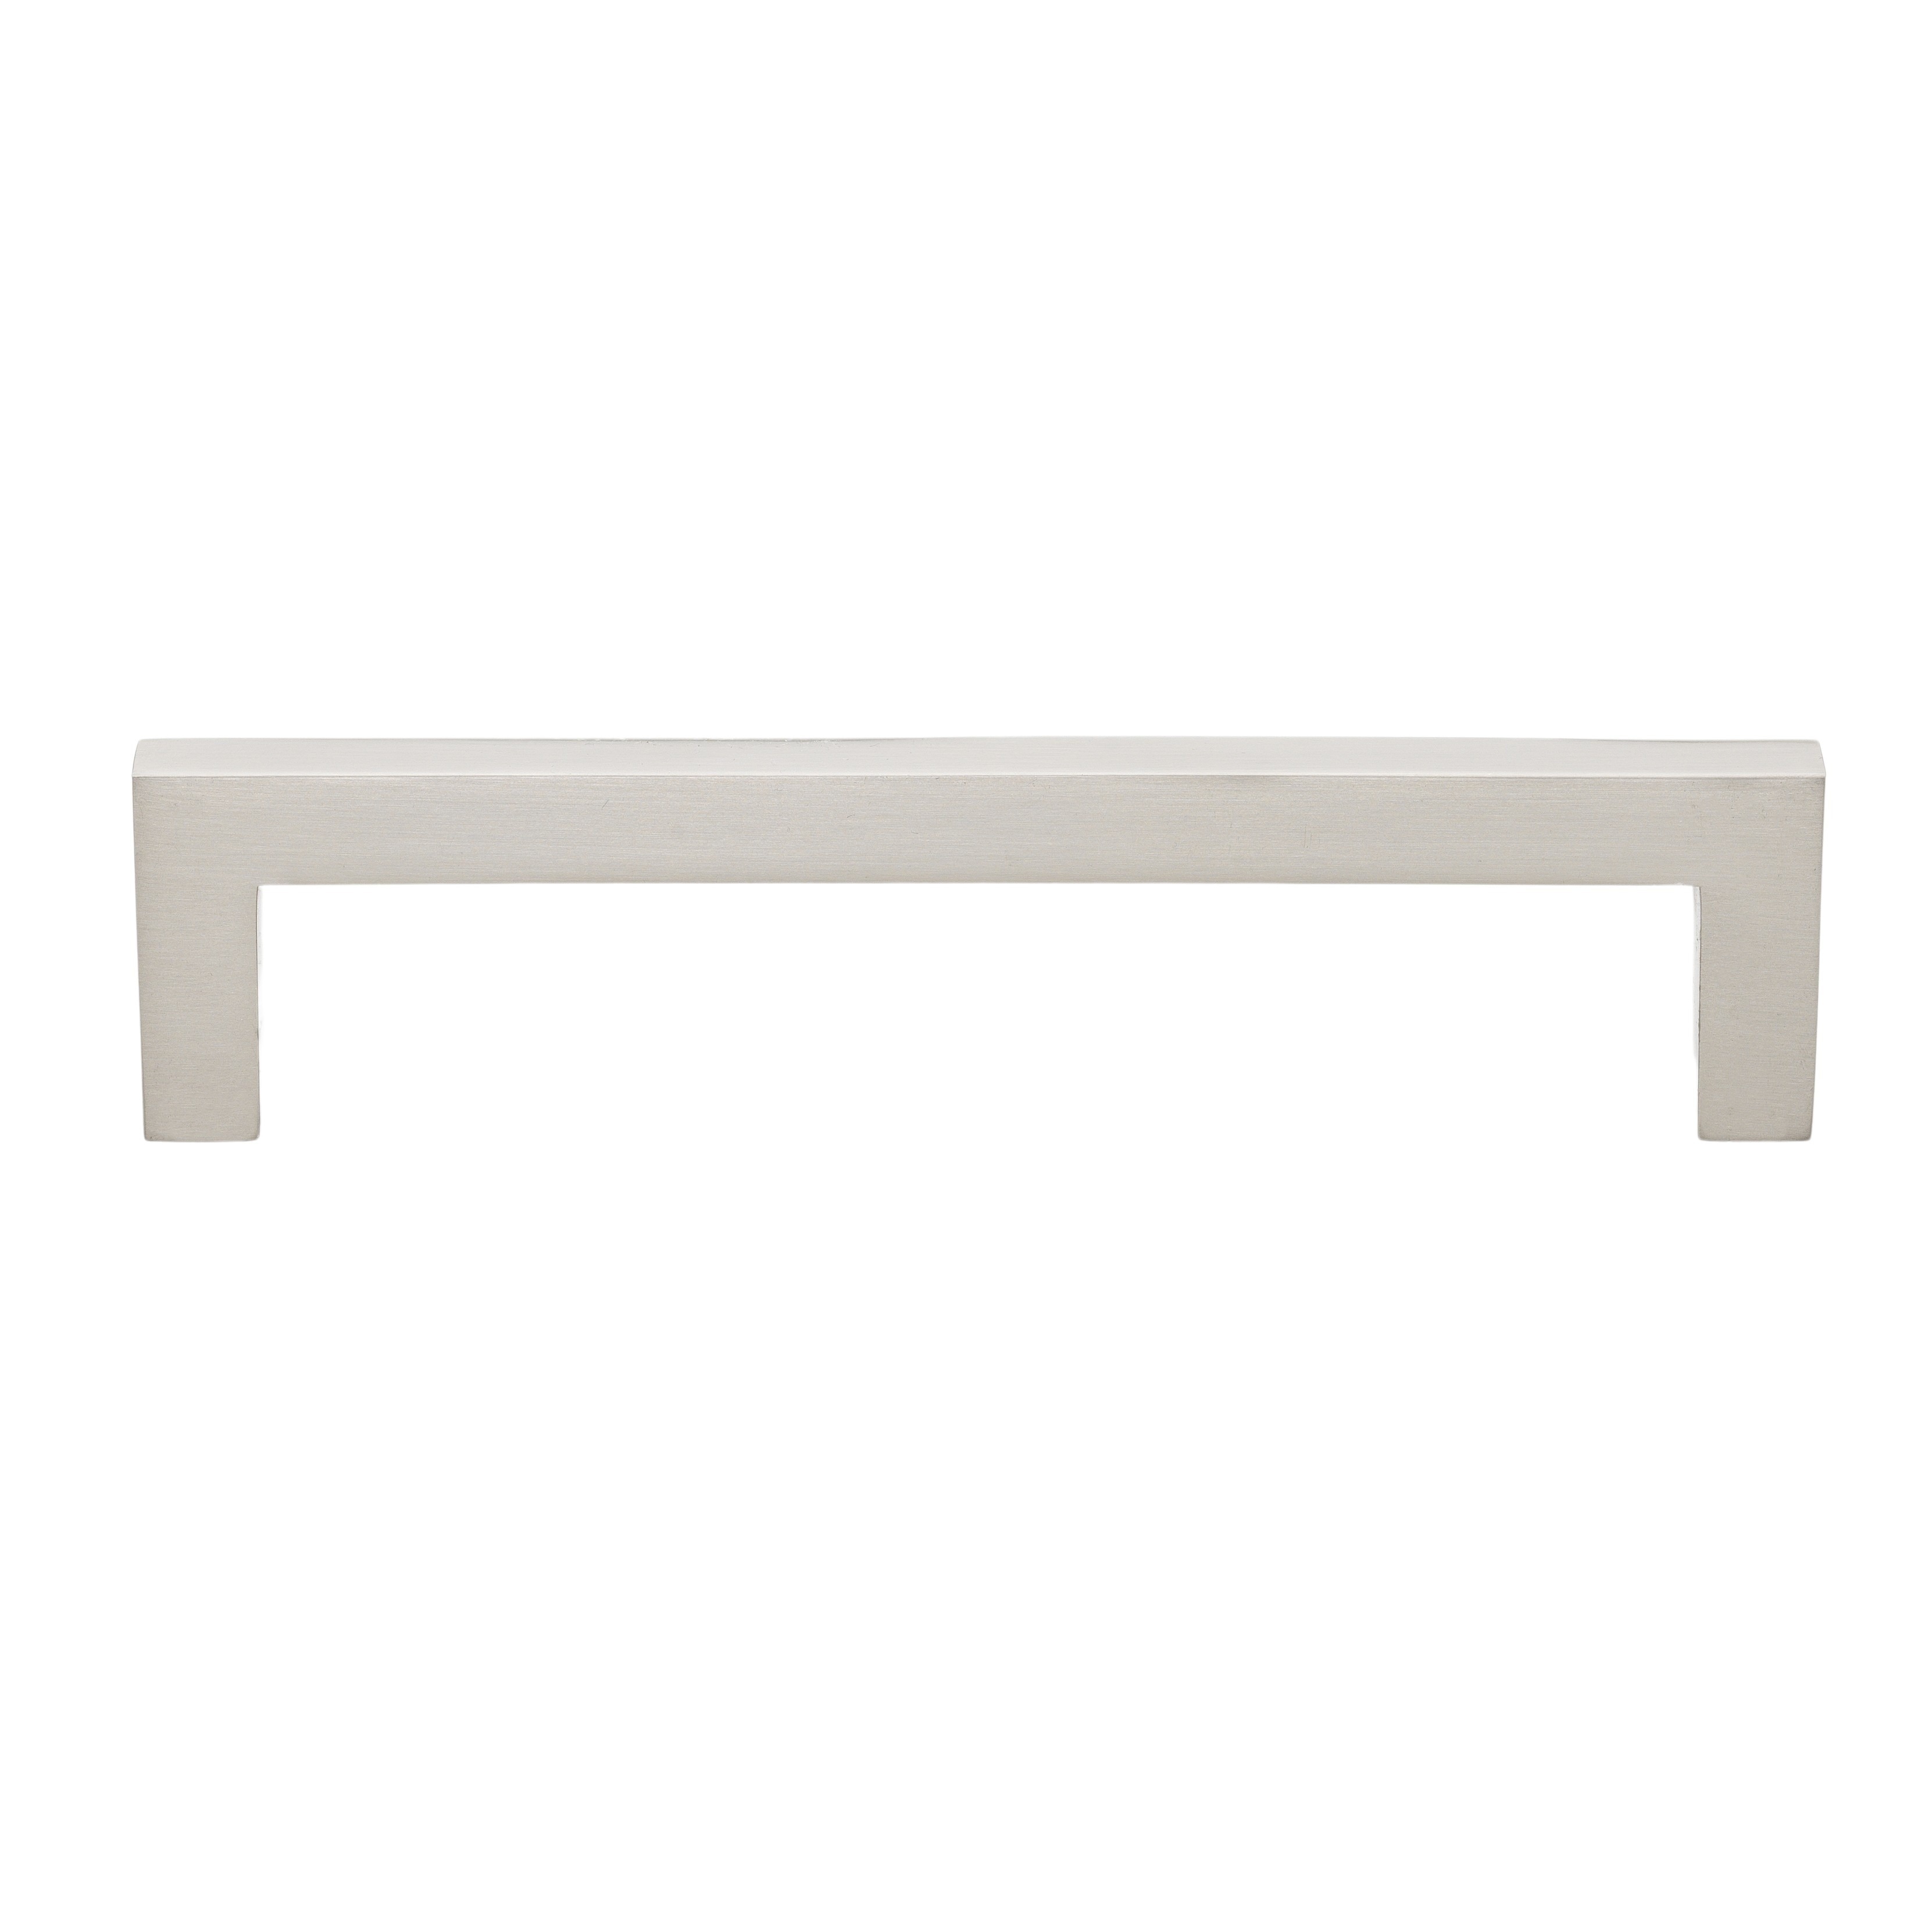 GlideRite 5 in. Center Solid Square Bar Pull Cabinet Hardware Handles, Satin Nickel, Pack of 25 - image 1 of 3